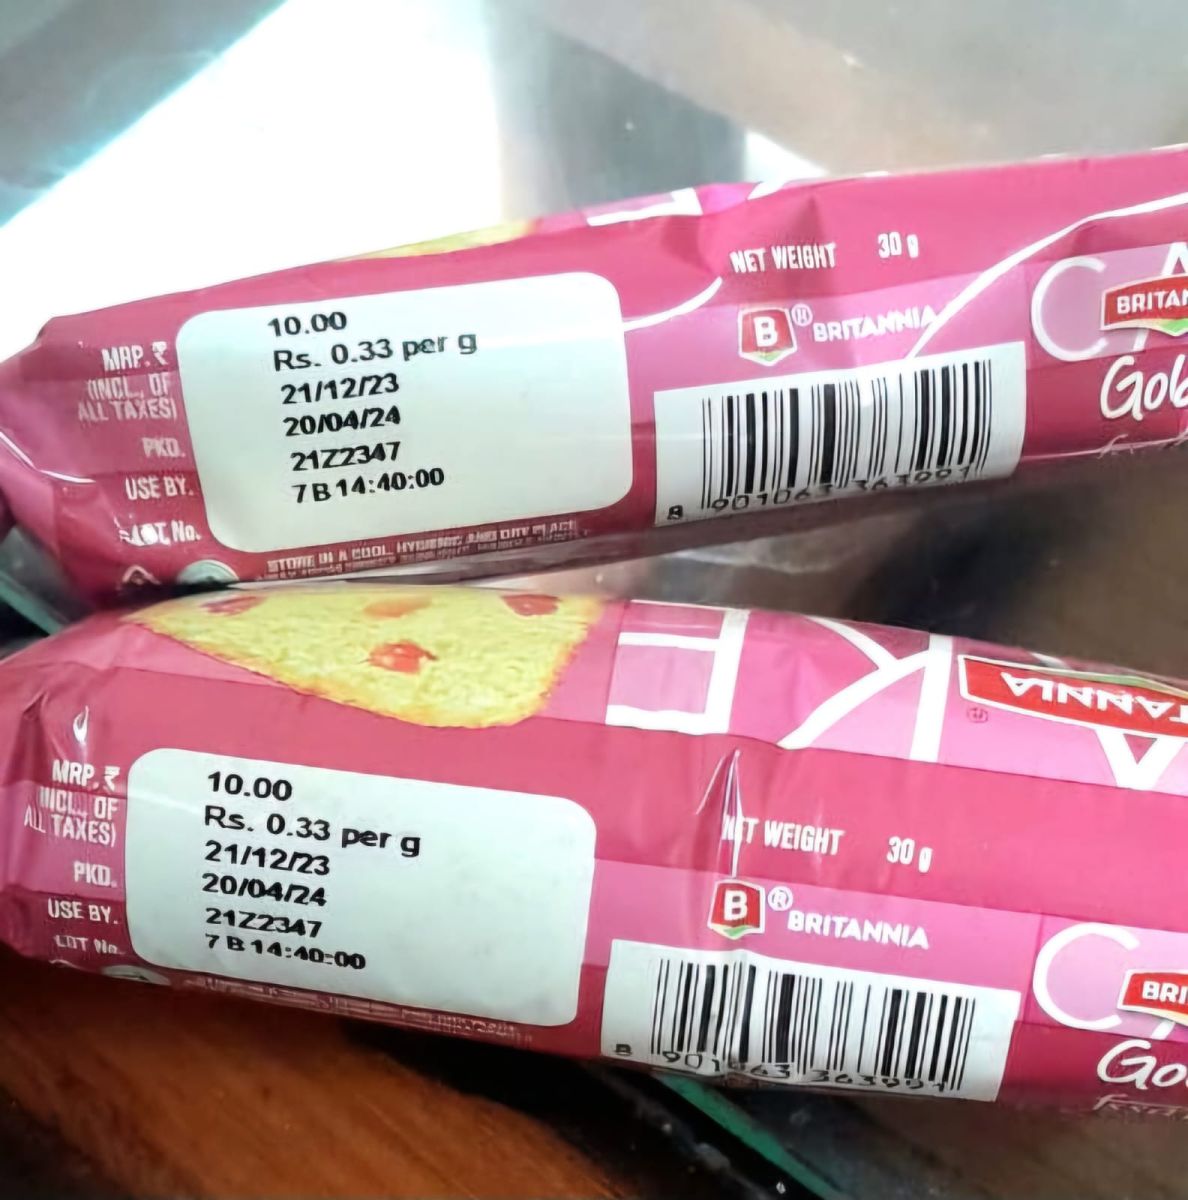 Expired Packed Food Products